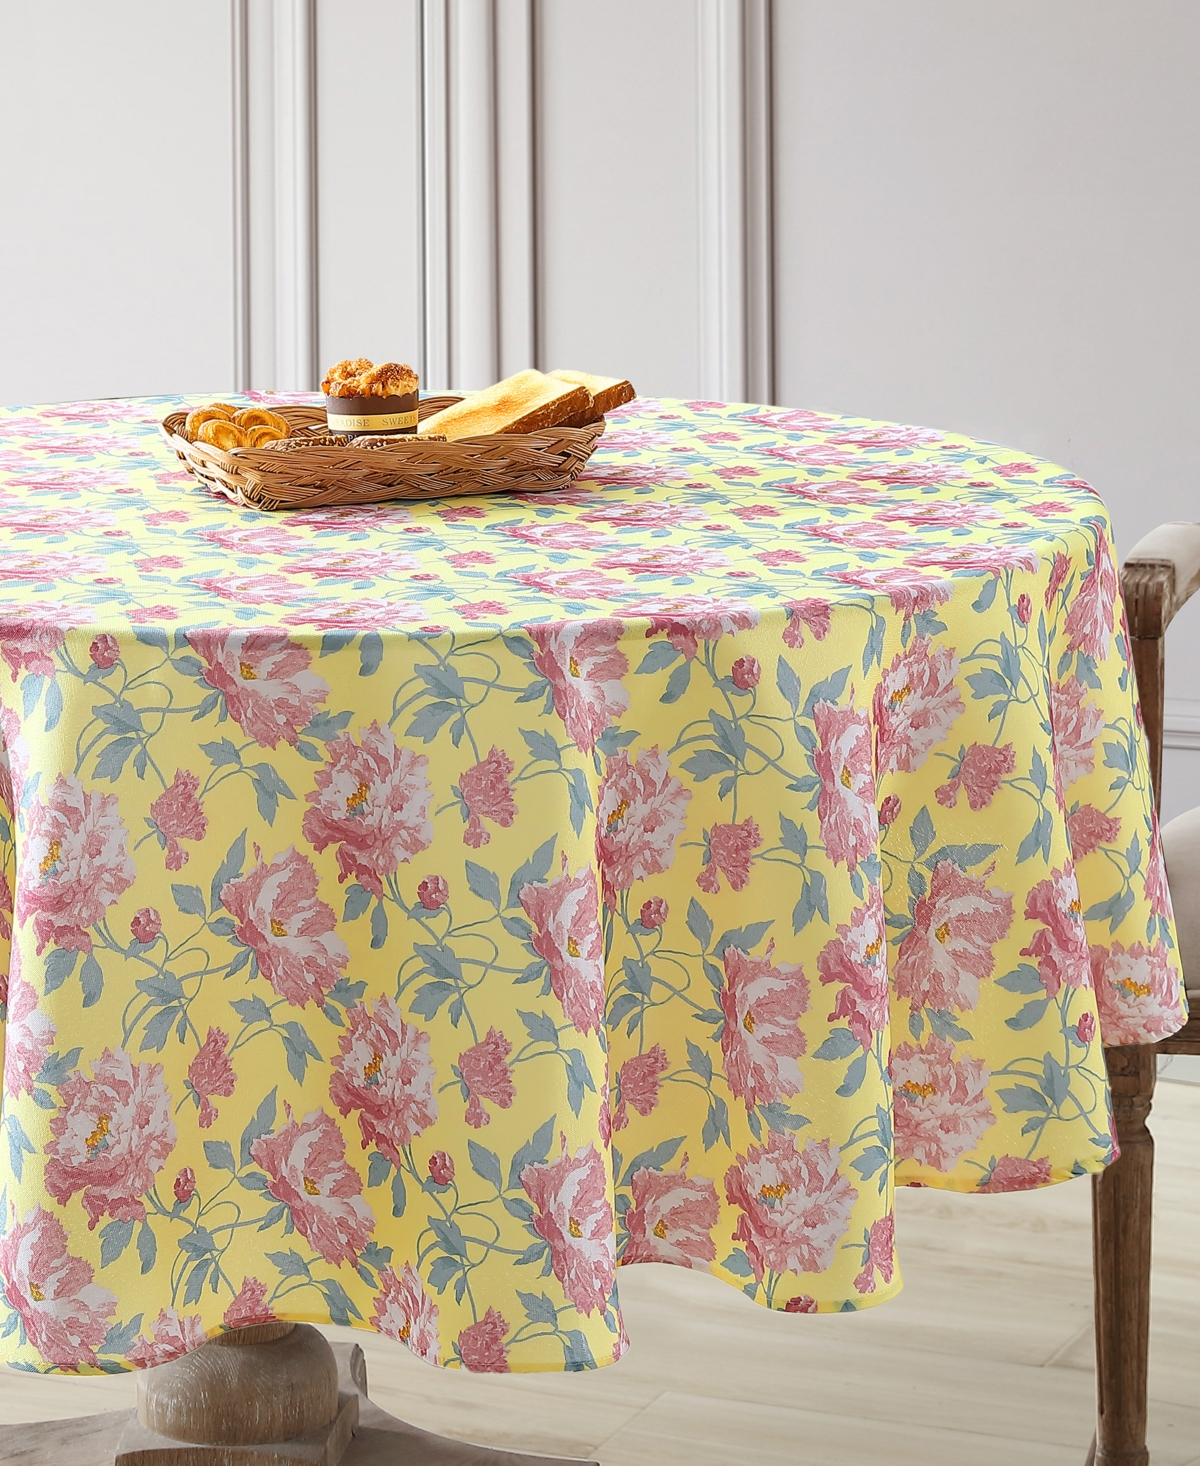 Laura Ashley Easy Care Pattern Tablecloth, 70" Round In Peony